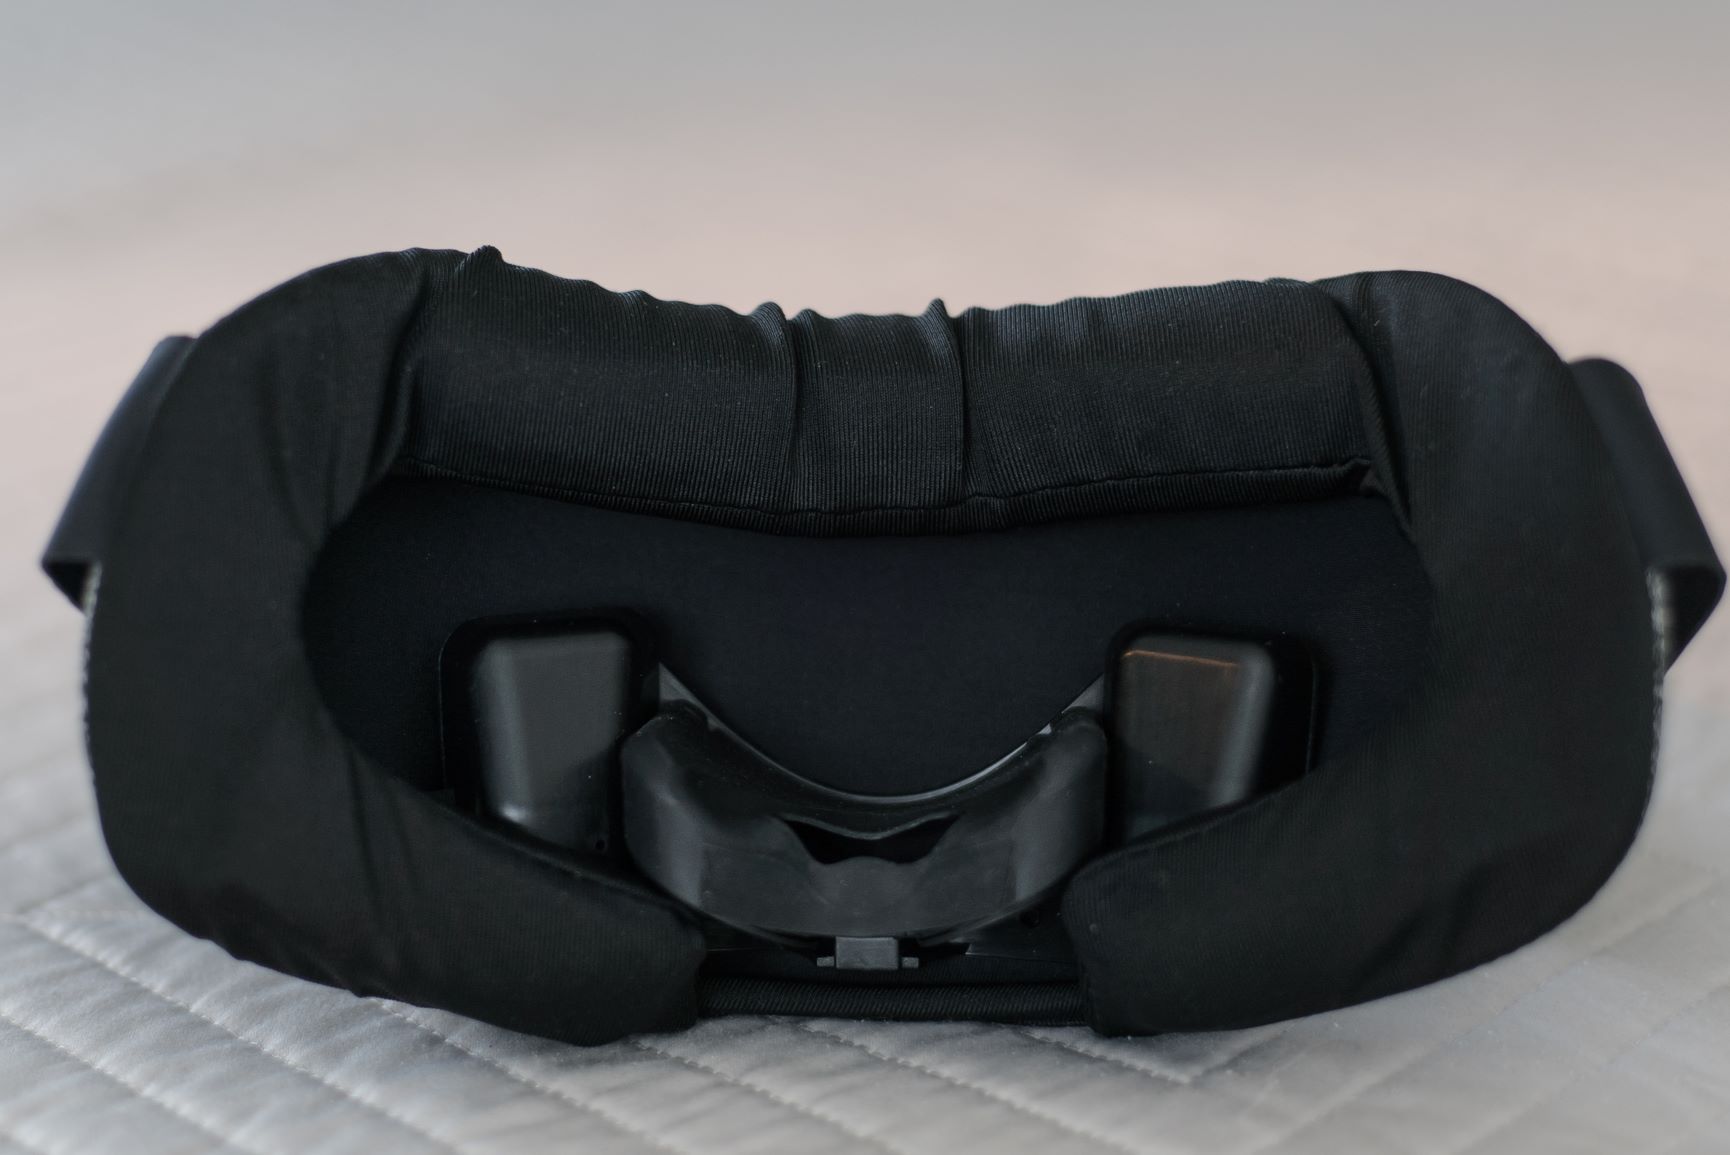 Premium microfiber sleep mask with easily adjustable rear head strap. The detachable sleep mask is machine-washable. The removable silicone nose piece can be washed in the sink with gentle soap.